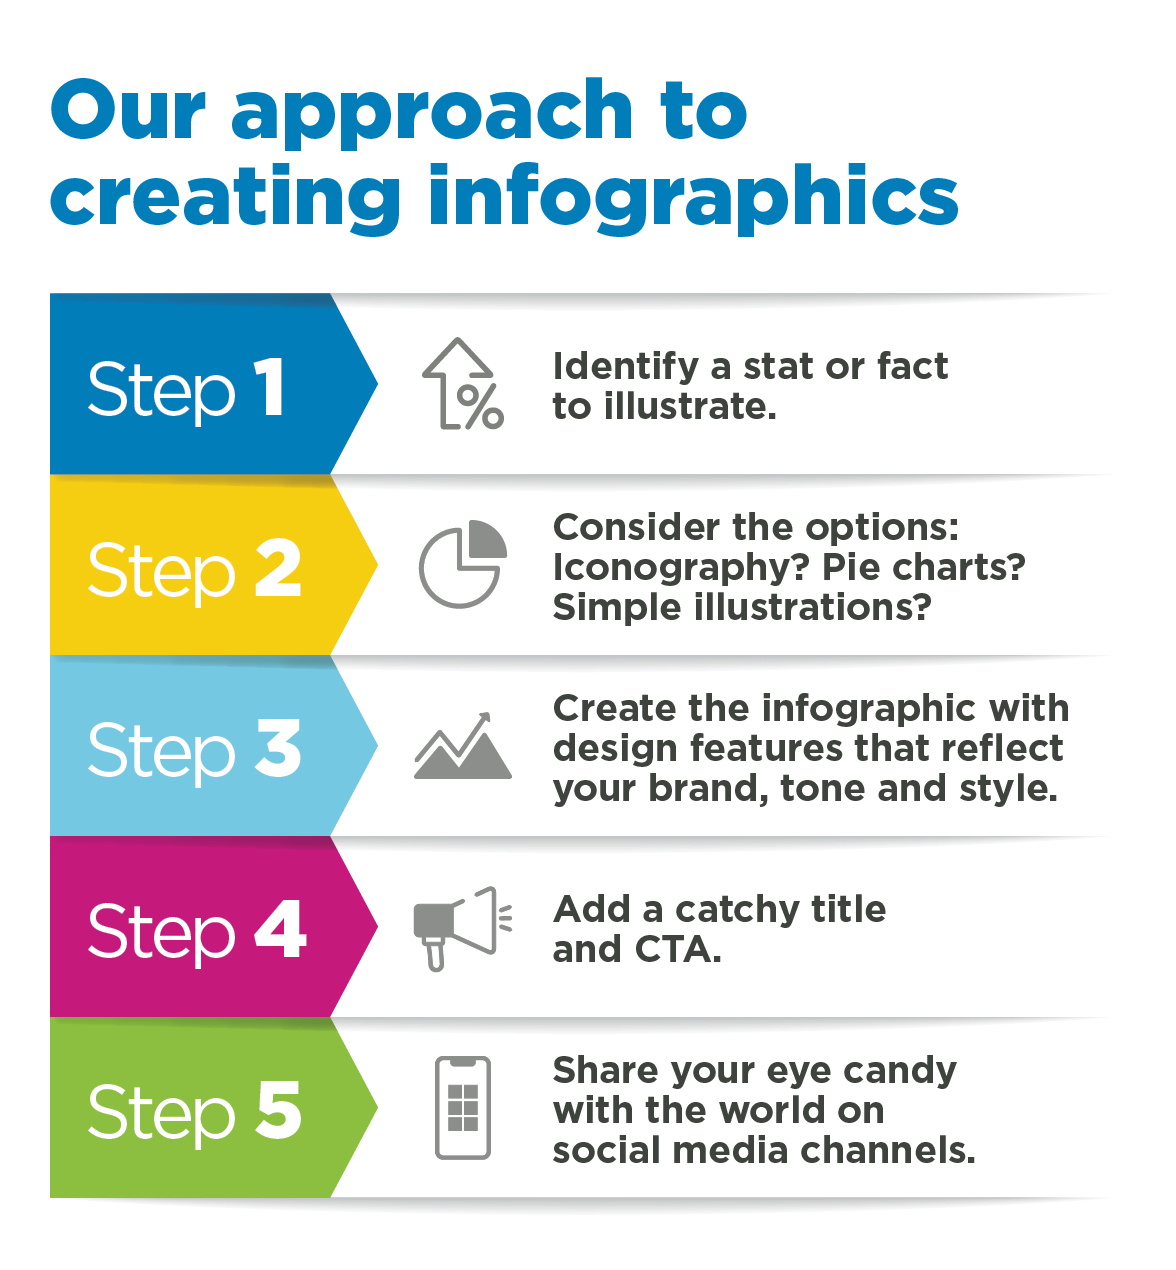 WG Content's process for creating infographics